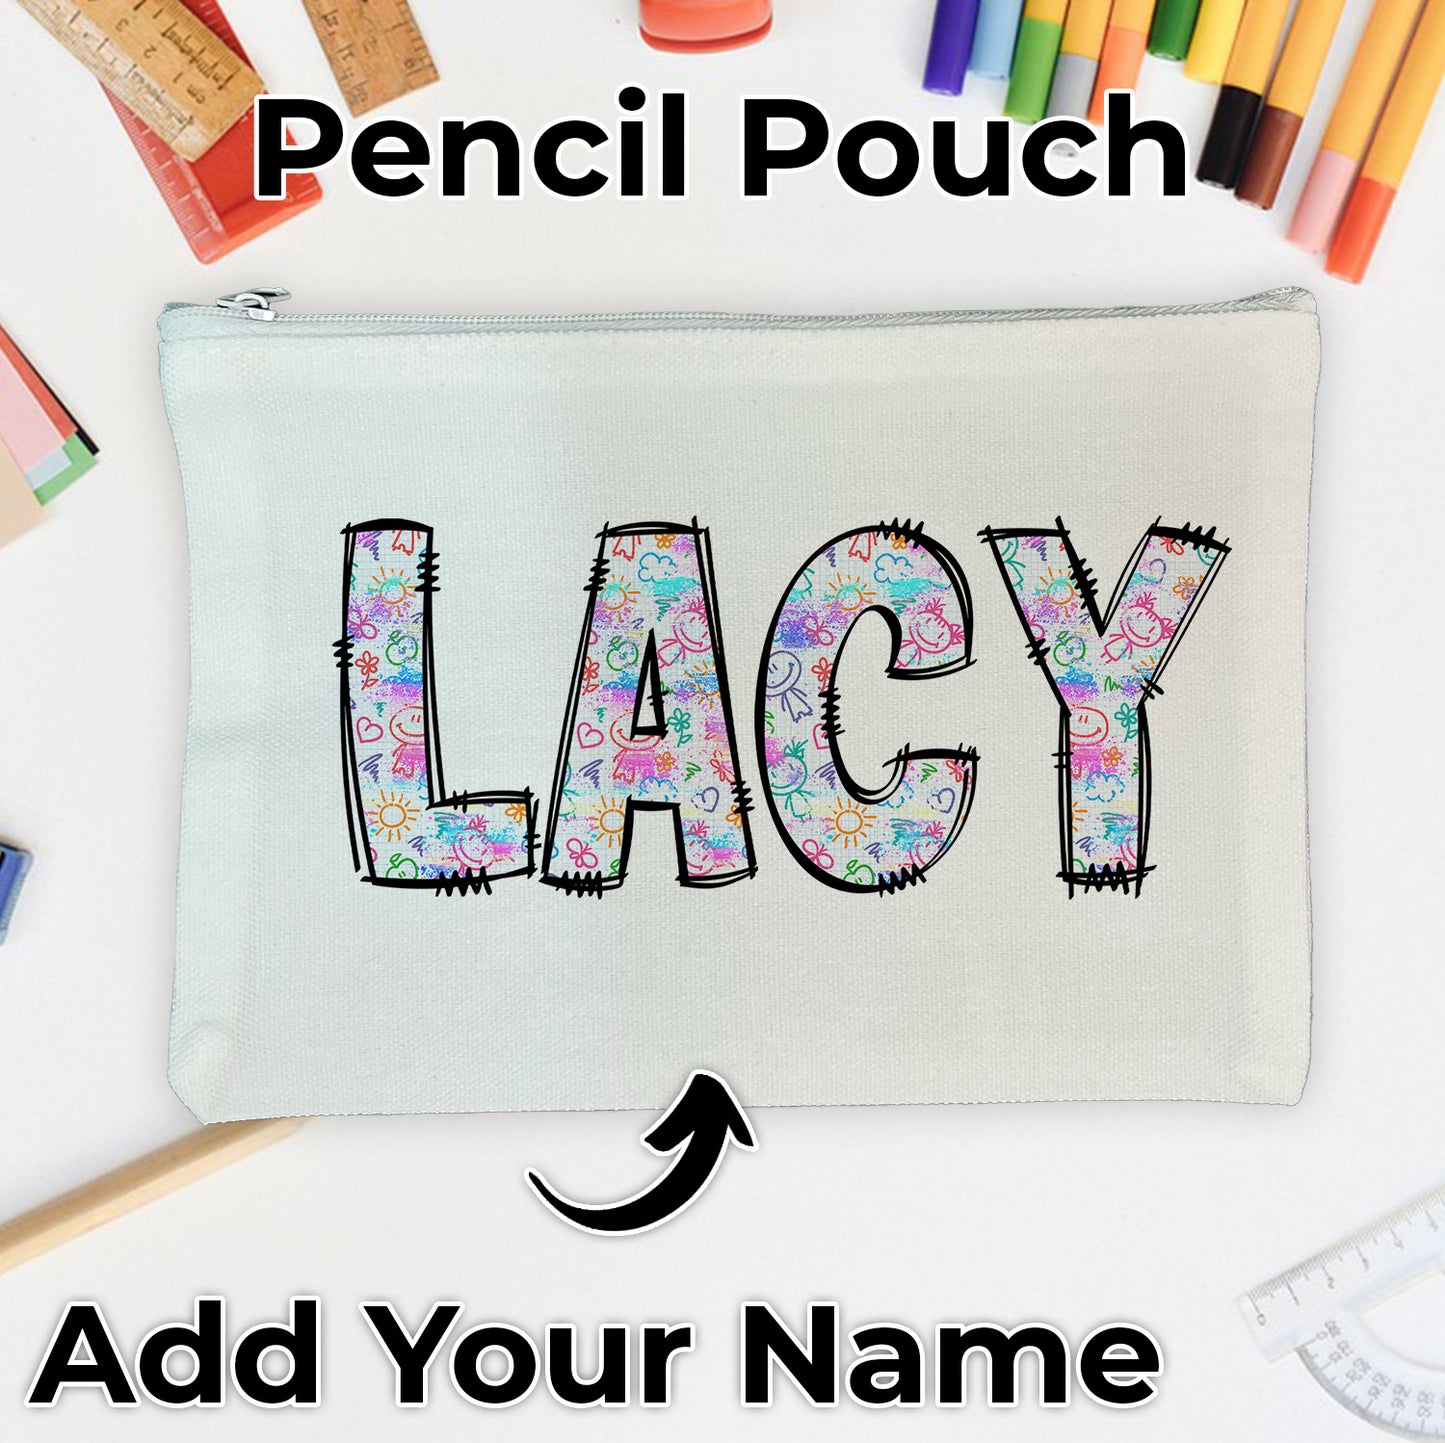 Custom Stick Figure Drawings Letters - Add Your Name Pencil Pouch for School Supplies